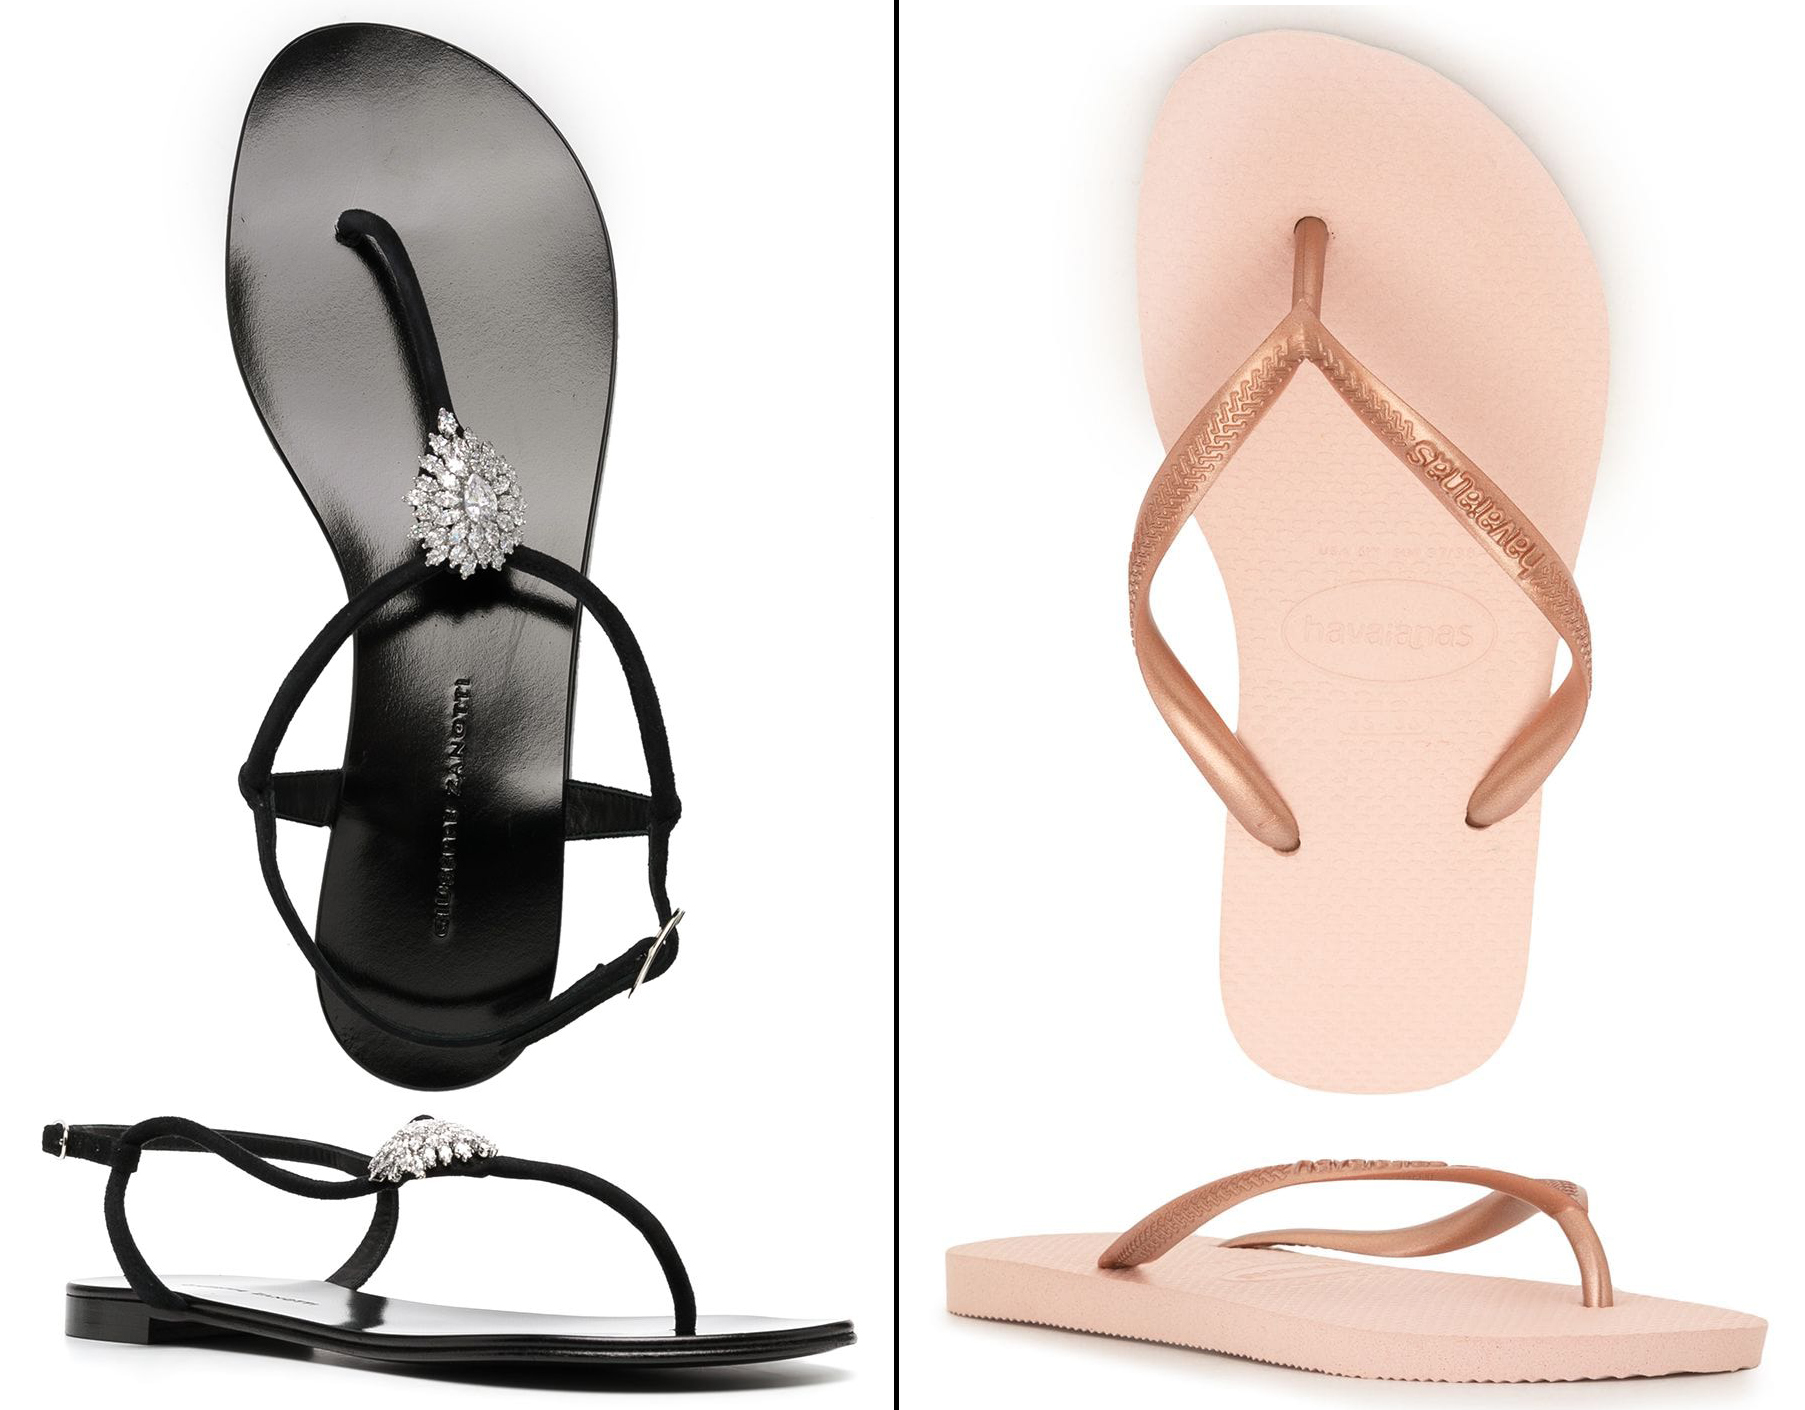 Thongs are usually made of leather, whereas flip-flops are typically made from rubber, foam, or plastic